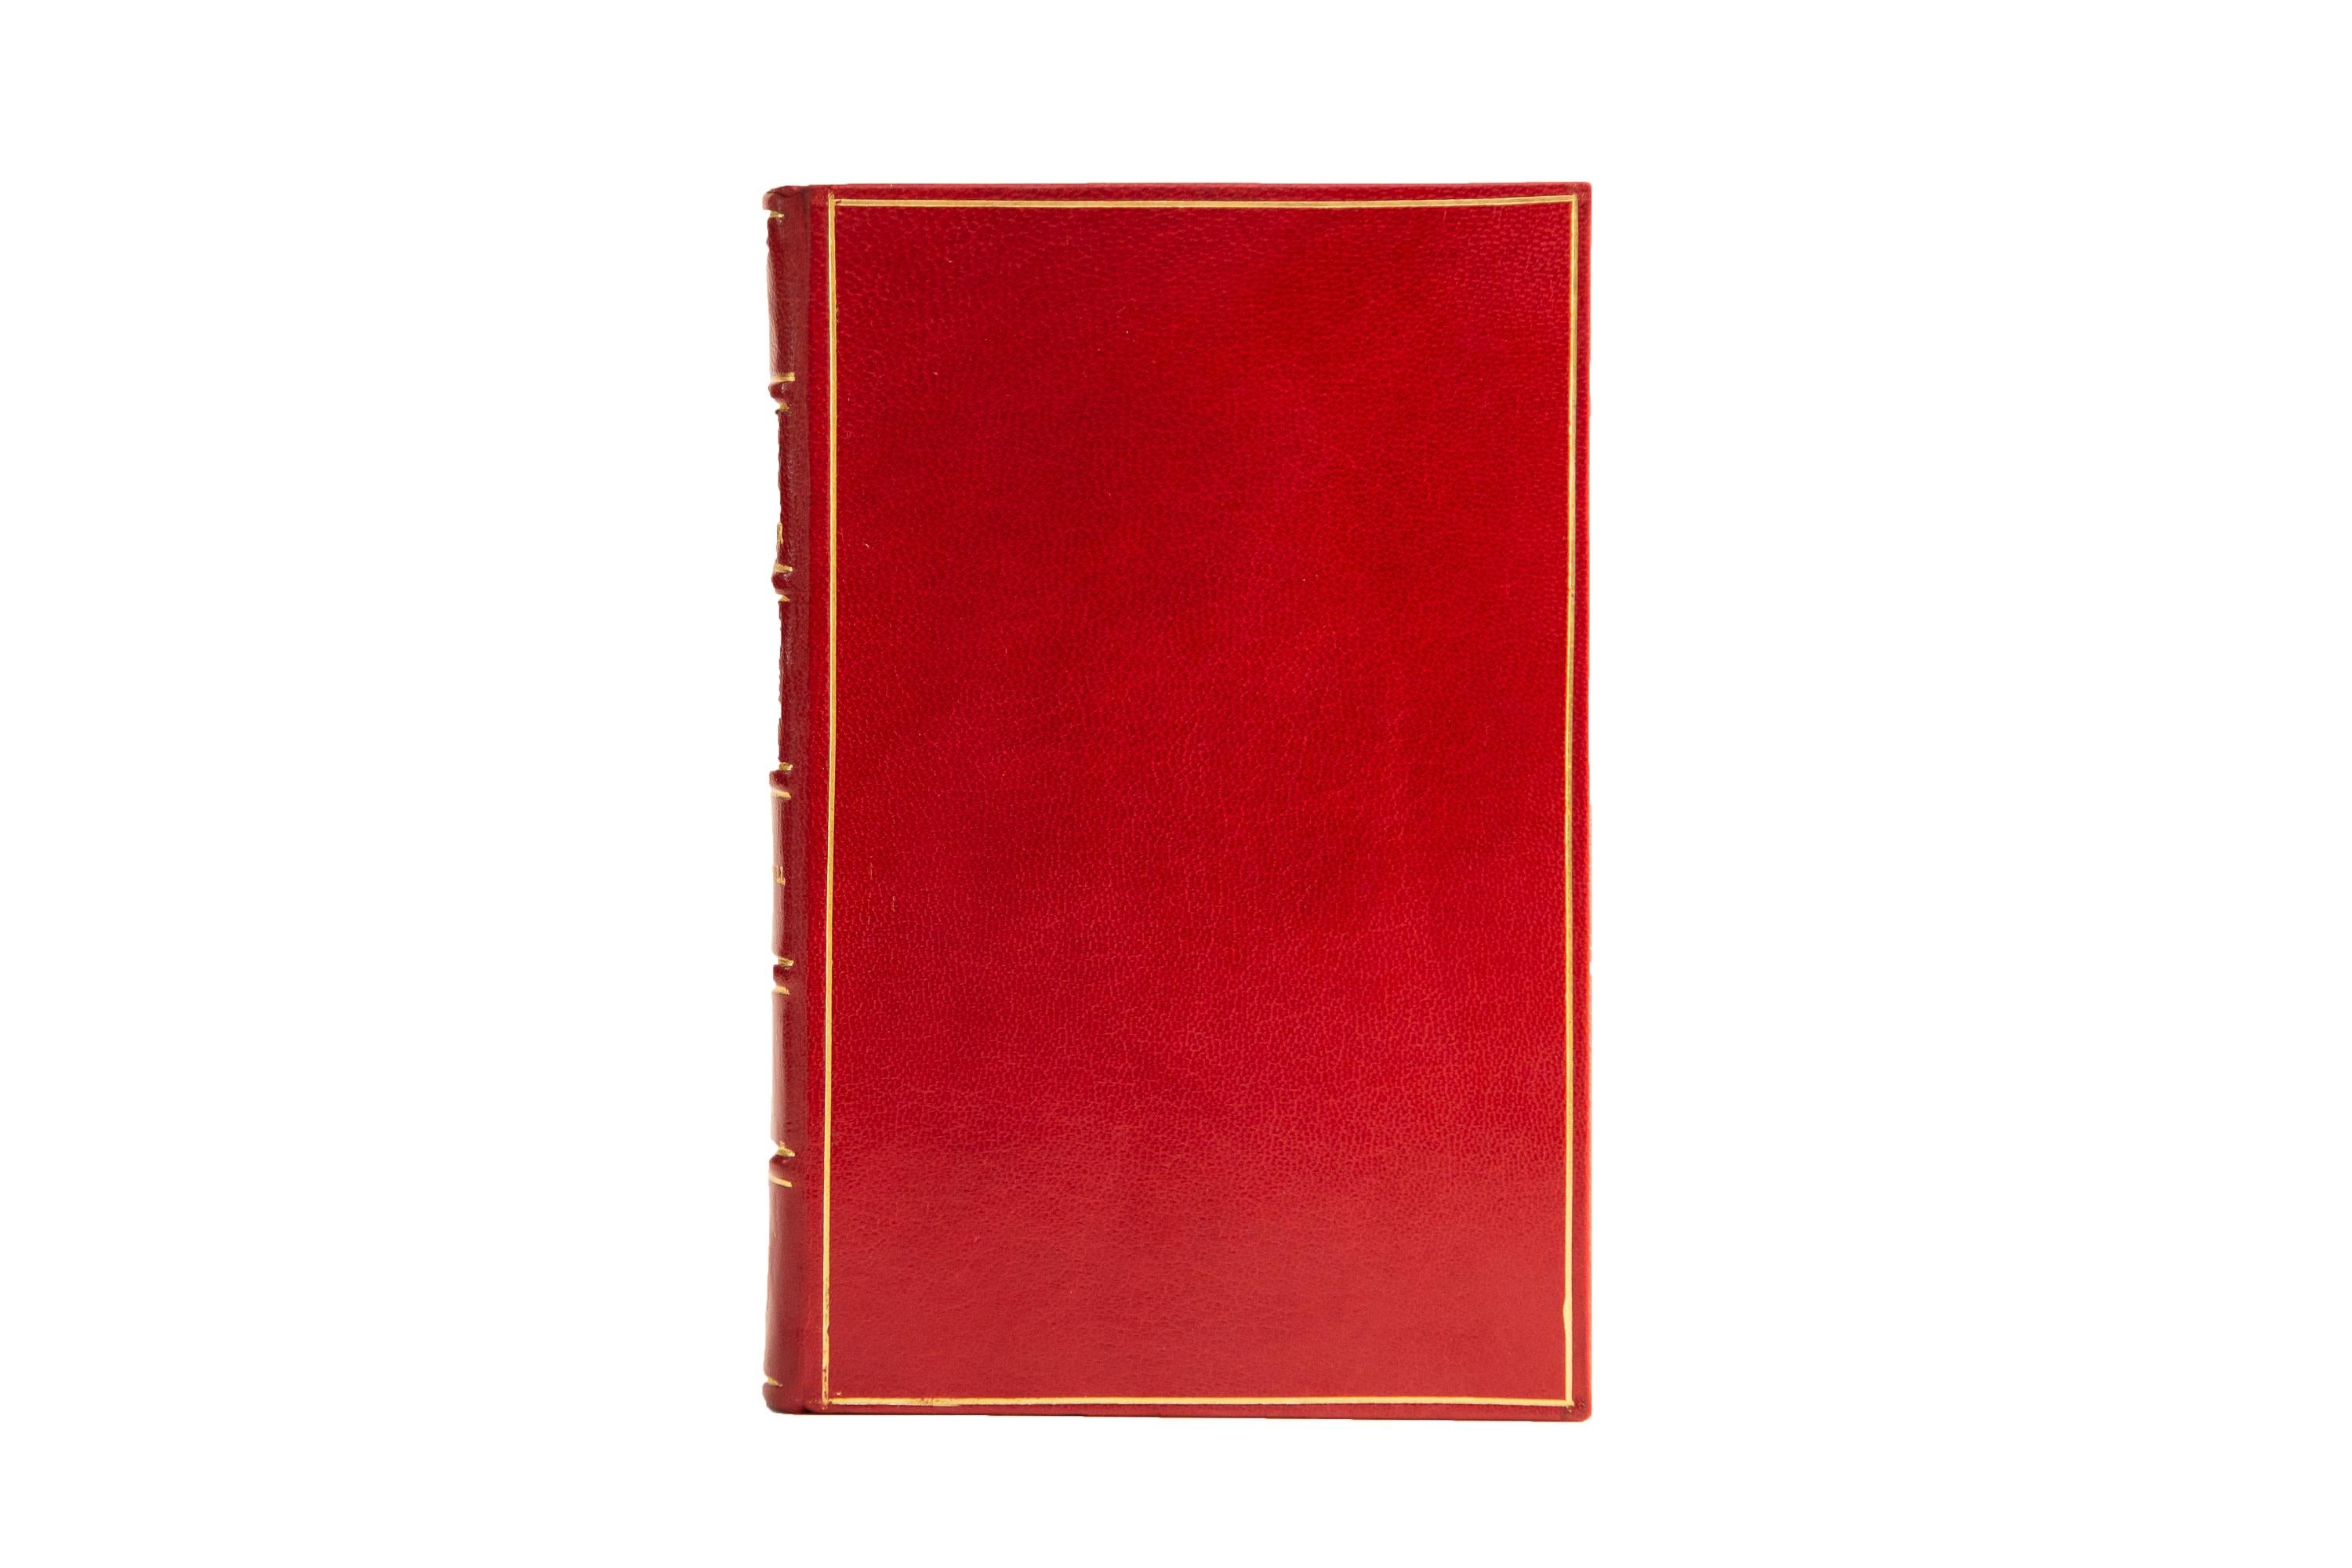 6 Volumes. Winston Churchill, The The Second World War. First edition. Bound in full red morocco with the covers displaying lion details, the publication date, bordering, and label lettering, all gilt-tooled. All of the edges are gilt. Published by